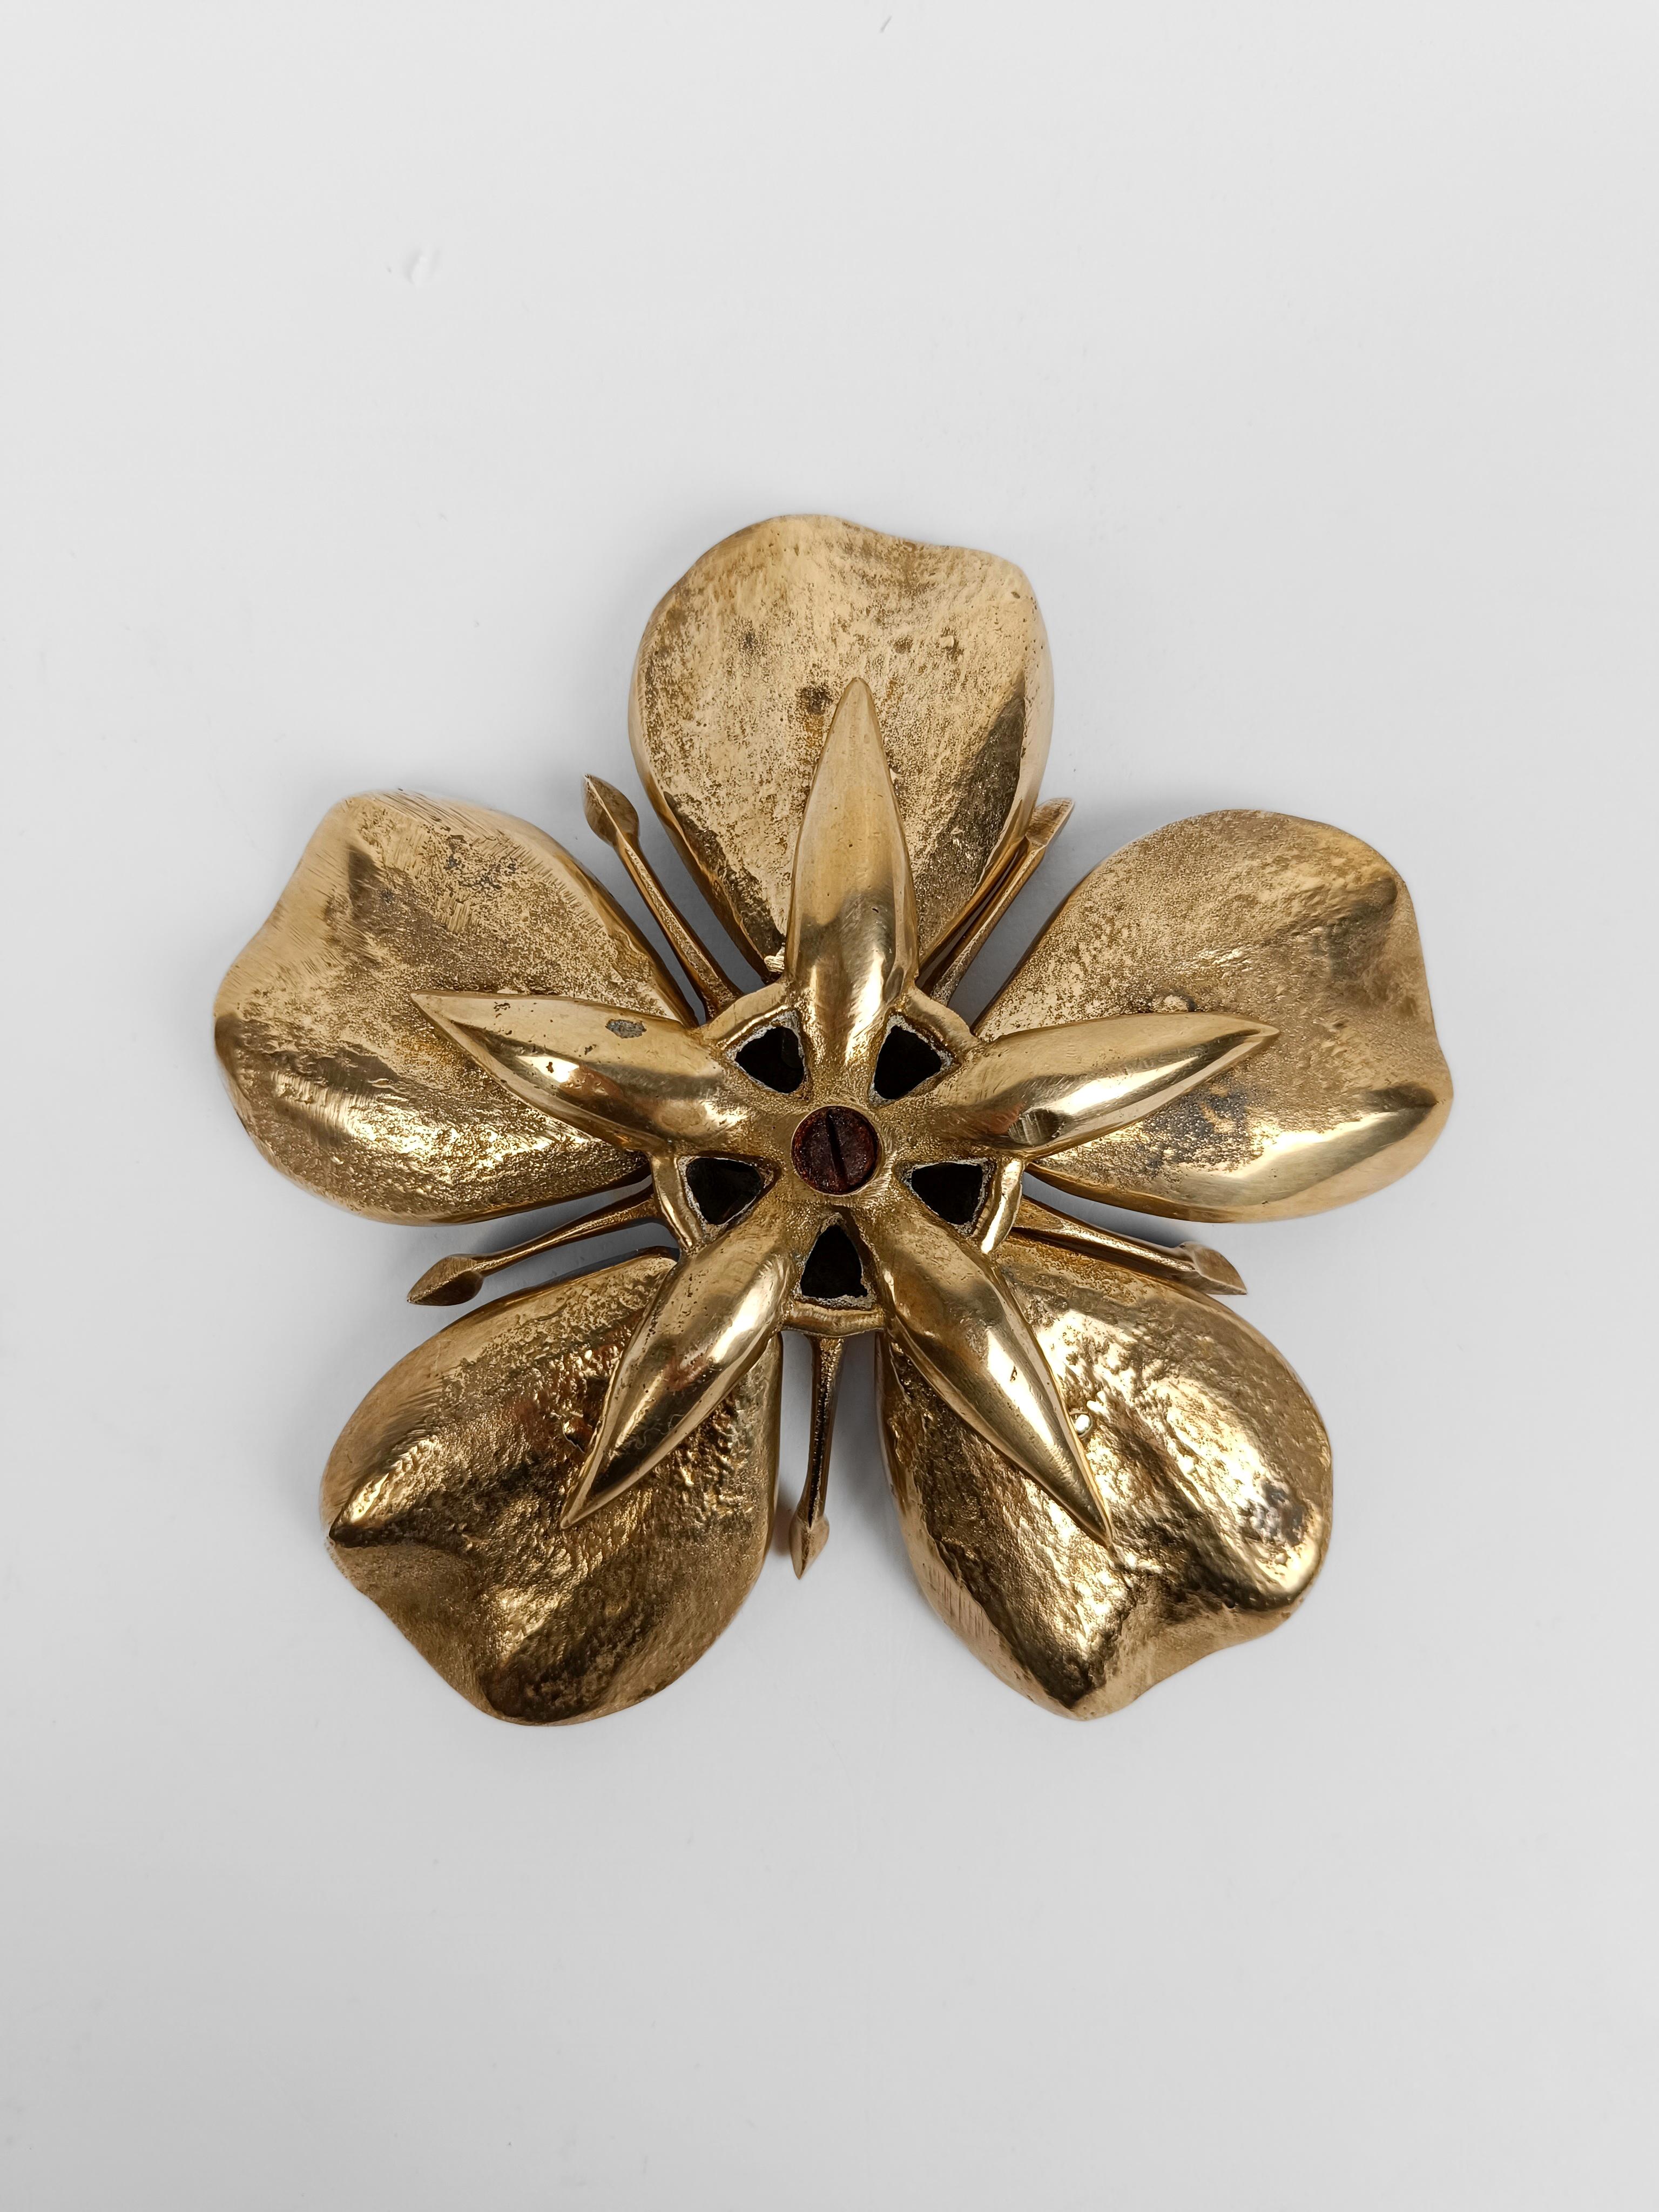 Mid-Century Modern Vintage Brass Metal FLOWER ASHTRAY in the style of Gucci with Removable Petals